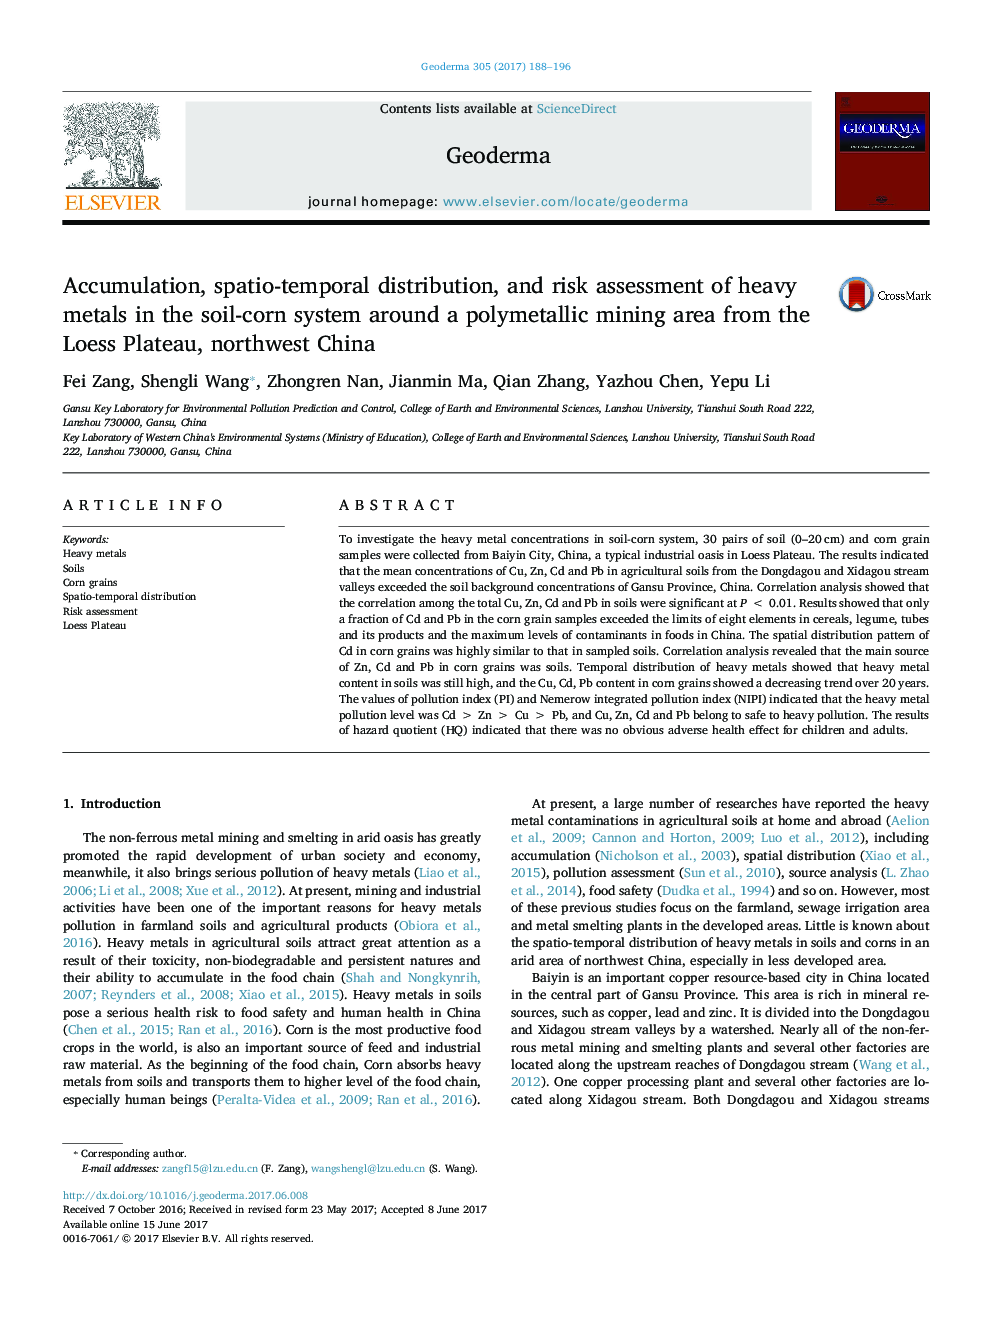 Accumulation, spatio-temporal distribution, and risk assessment of heavy metals in the soil-corn system around a polymetallic mining area from the Loess Plateau, northwest China